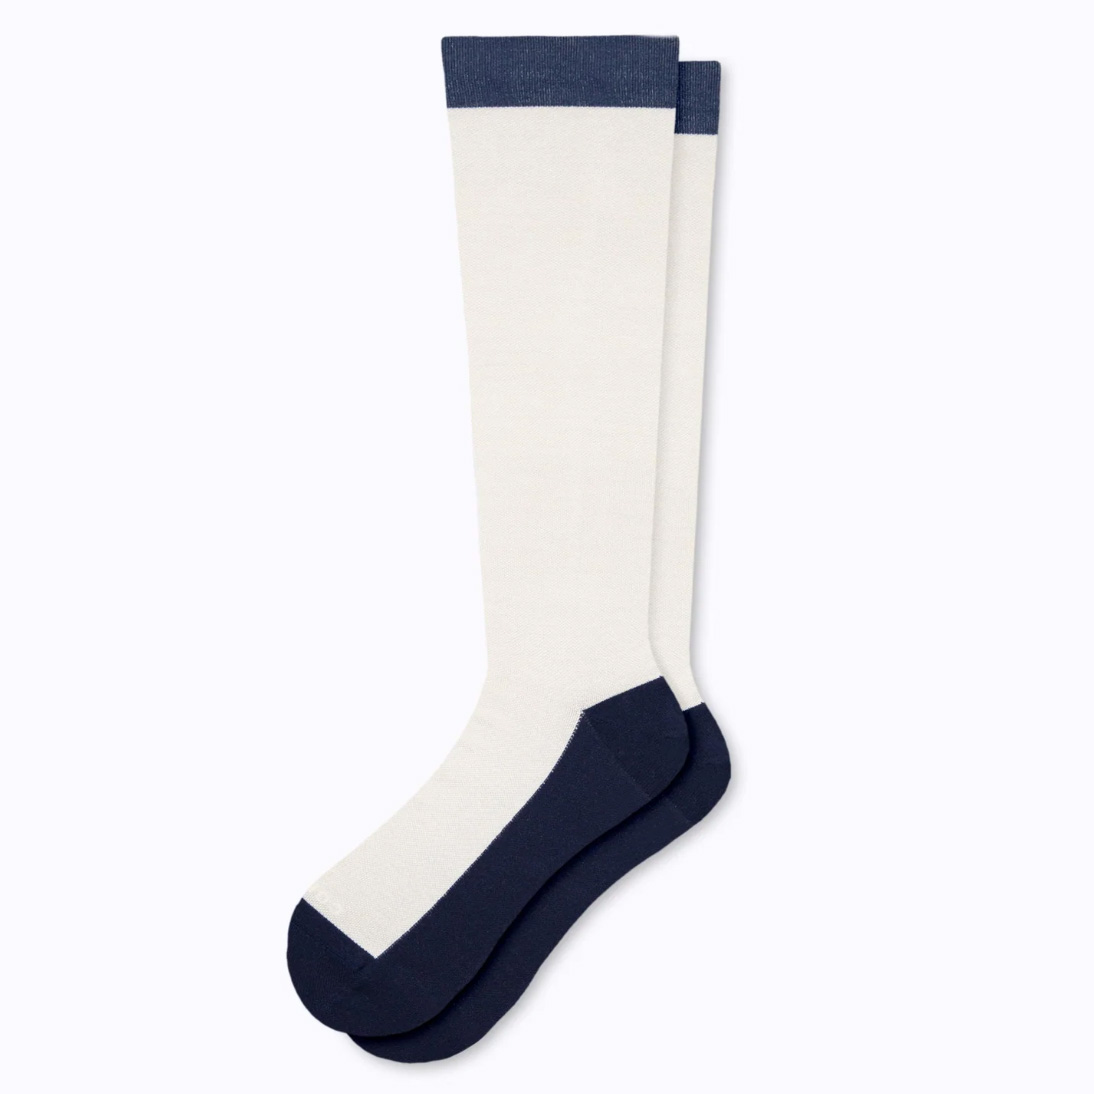 A pair of black and white knee-length socks